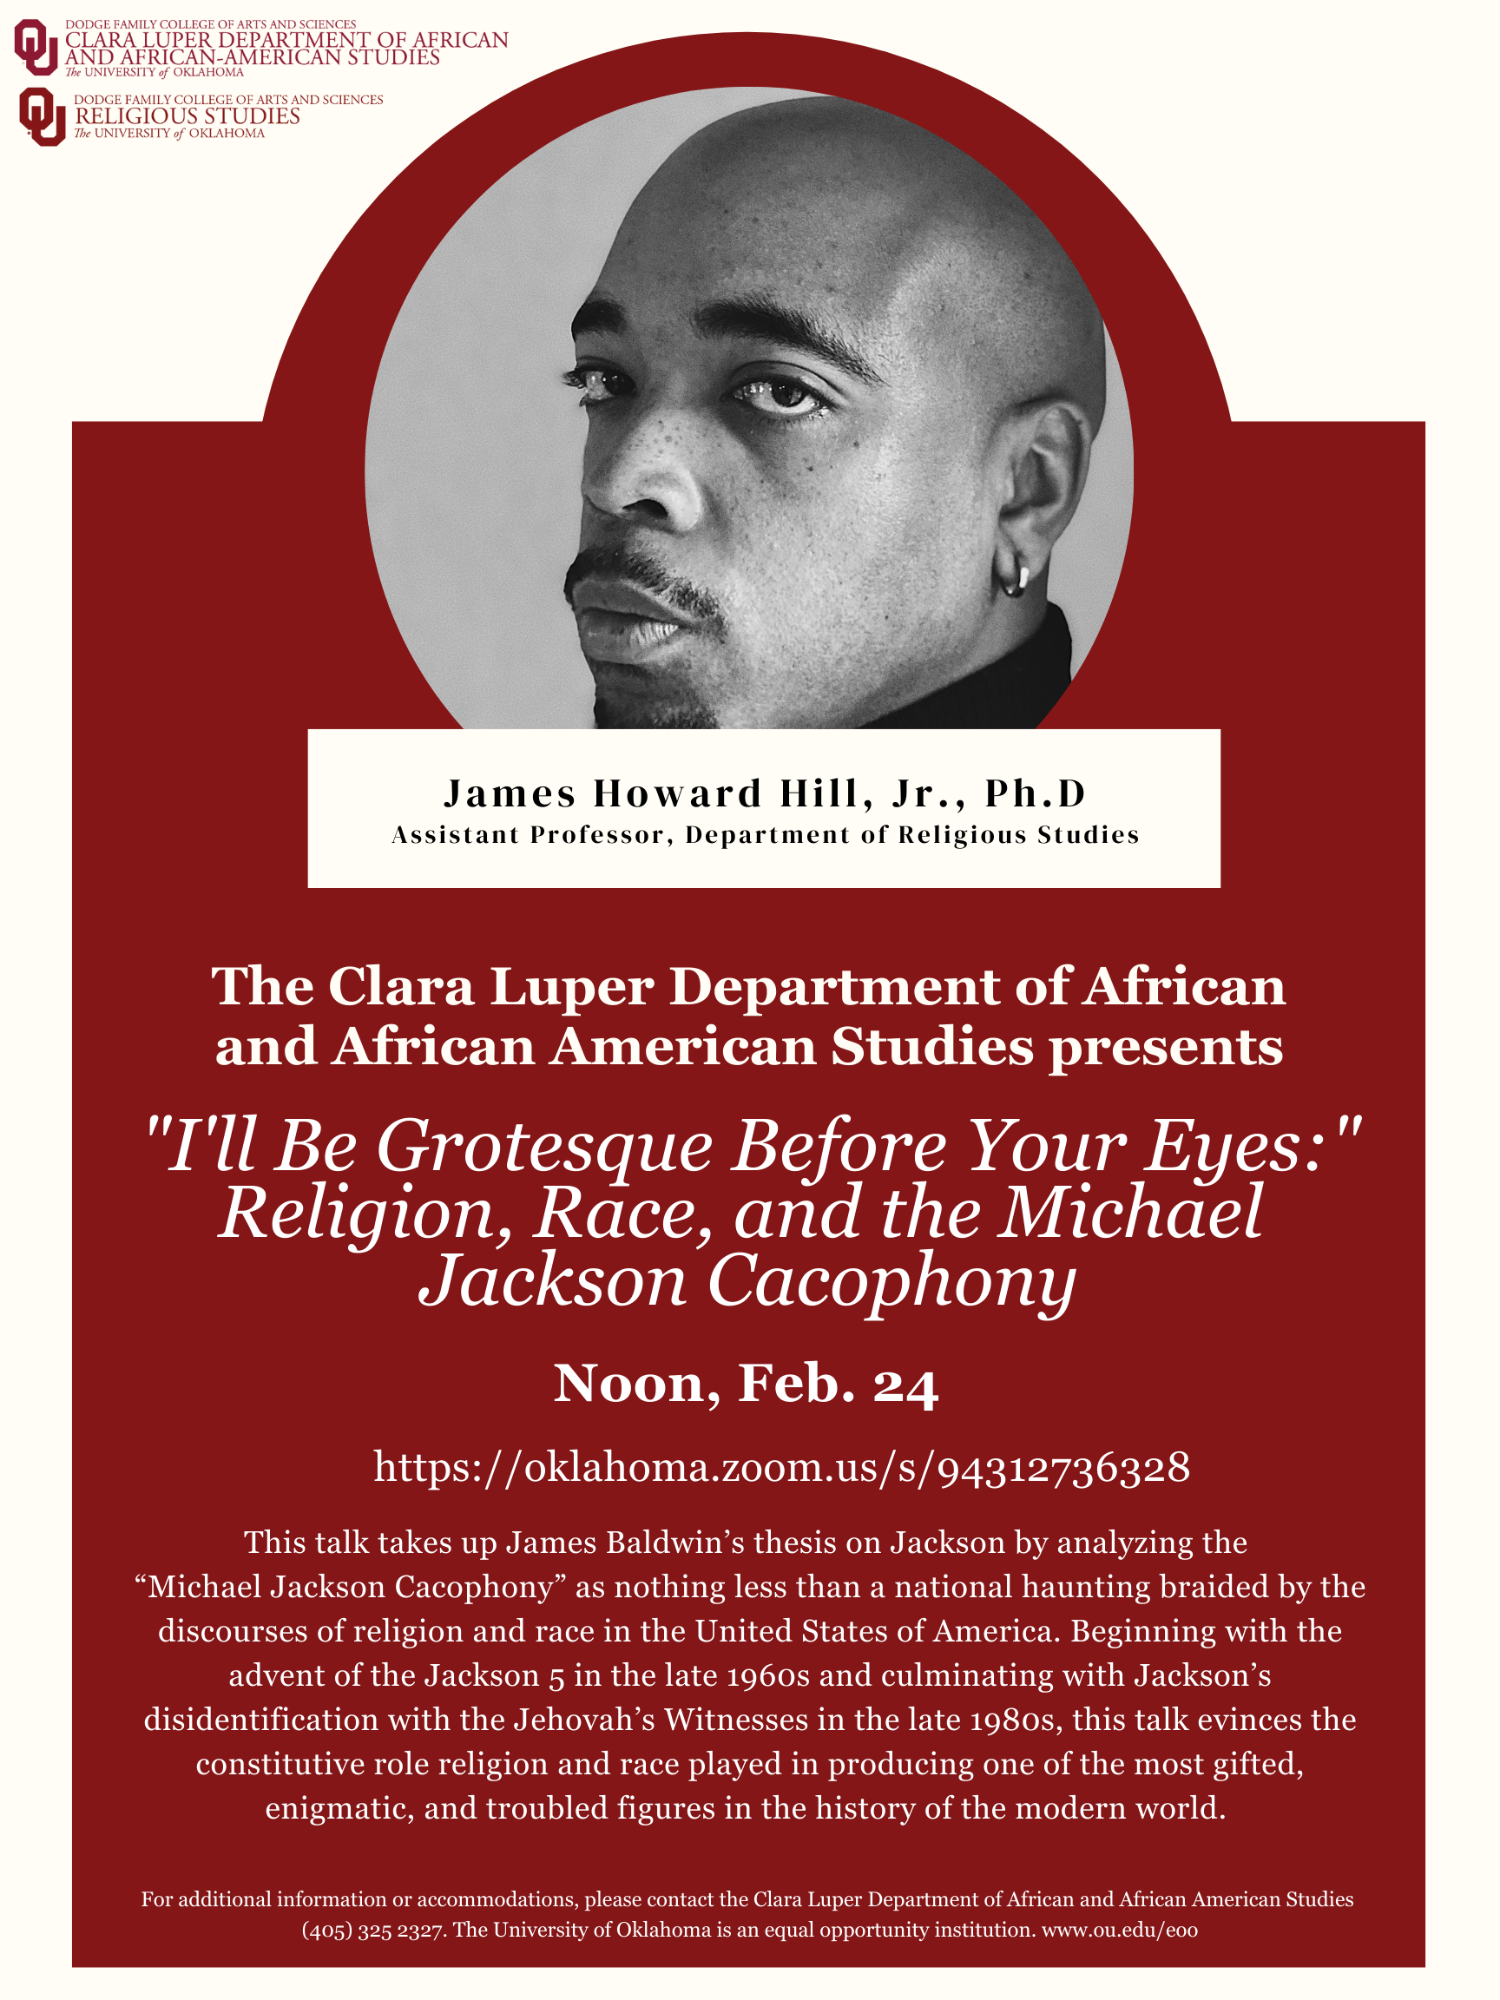 The Clara Luper Department of African and African American Studies presents: "I'll Be Grotesque Before Your Eyes:" Religion, Race, and the Michael Jackson Cacophony by James Howard Hill, Jr., Ph.D. on Thursday, Feb. 24 at Noon via Zoom  Access by Zoom here.  This talk takes up James Baldwin's thesis on Jackson by analyzing the "Michael Jackson Cacophony" as nothing less than a national haunting braided by the discourses of religion and race in the United States of America.  Beginning with the advent of the Jackson 5 in the late 1960s and culminating with Jackson's disidentification with the Jehovah's Witnesses in the late 1980s, this talk evinces the constitutive role religion and race played in producing one of the most gifted, enigmatic, and troubled figures in the history of the modern world.  For additional information or accommodations, please contact the Clara Luper Department of African and African American Studies (405) 325-2327.  The University of Oklahoma is an equal opportunity institution.  www.ou.edu/eoo  James Howard Hill AFAM Lecture